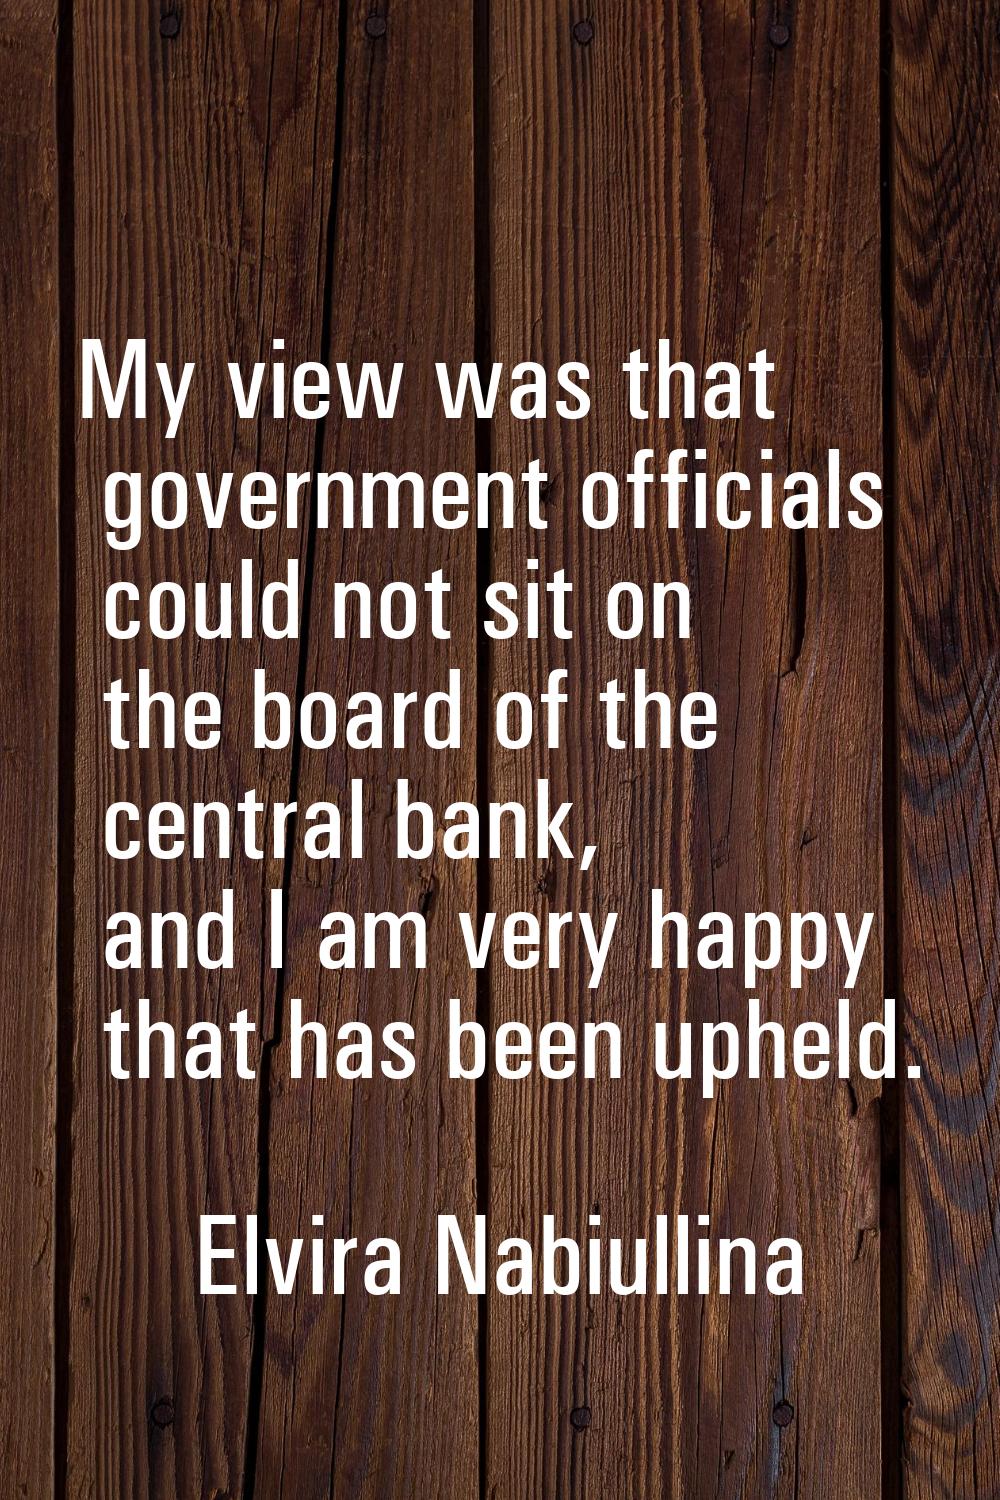 My view was that government officials could not sit on the board of the central bank, and I am very